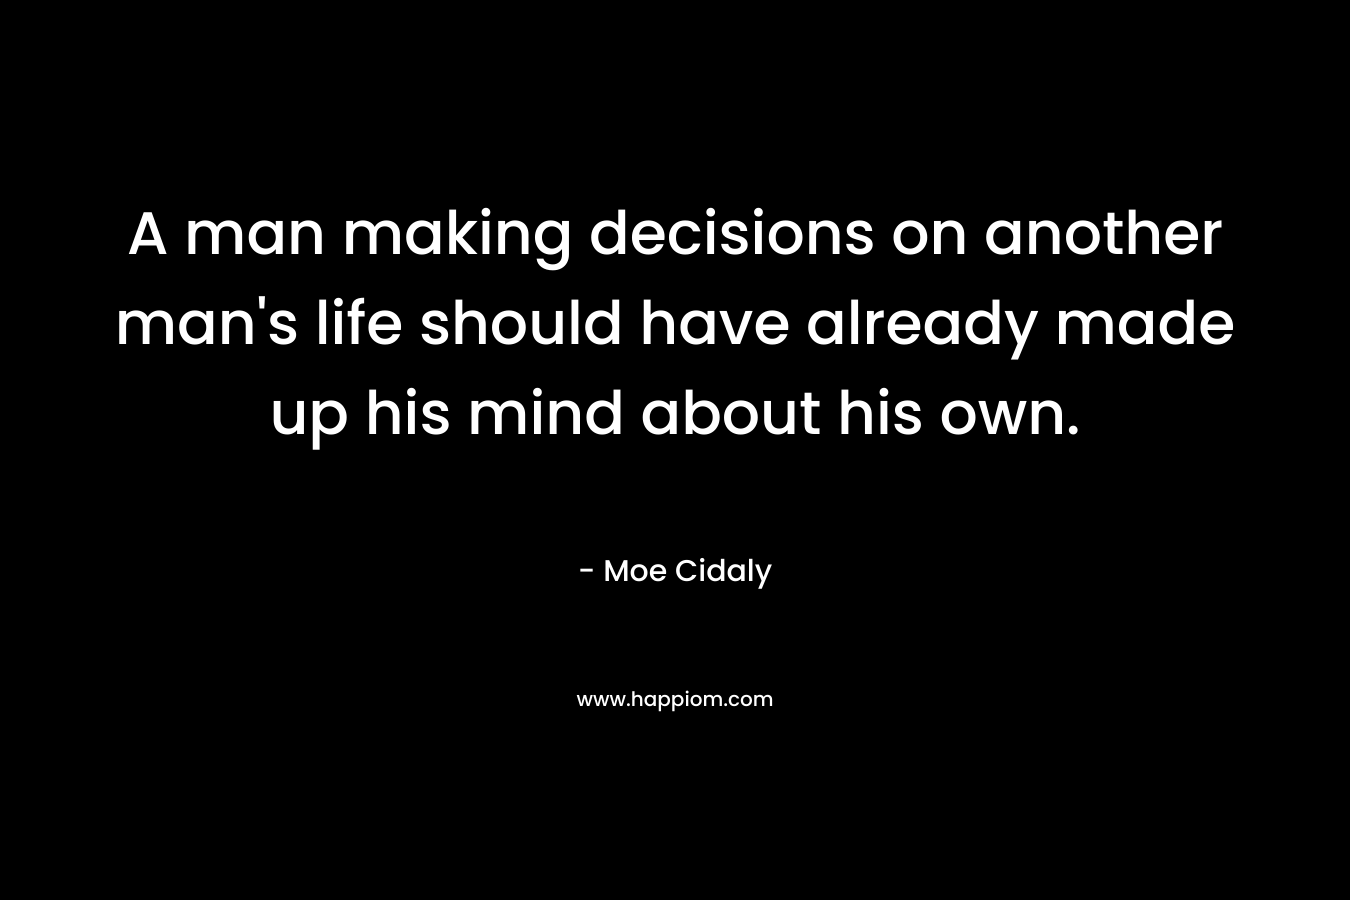 A man making decisions on another man’s life should have already made up his mind about his own. – Moe Cidaly